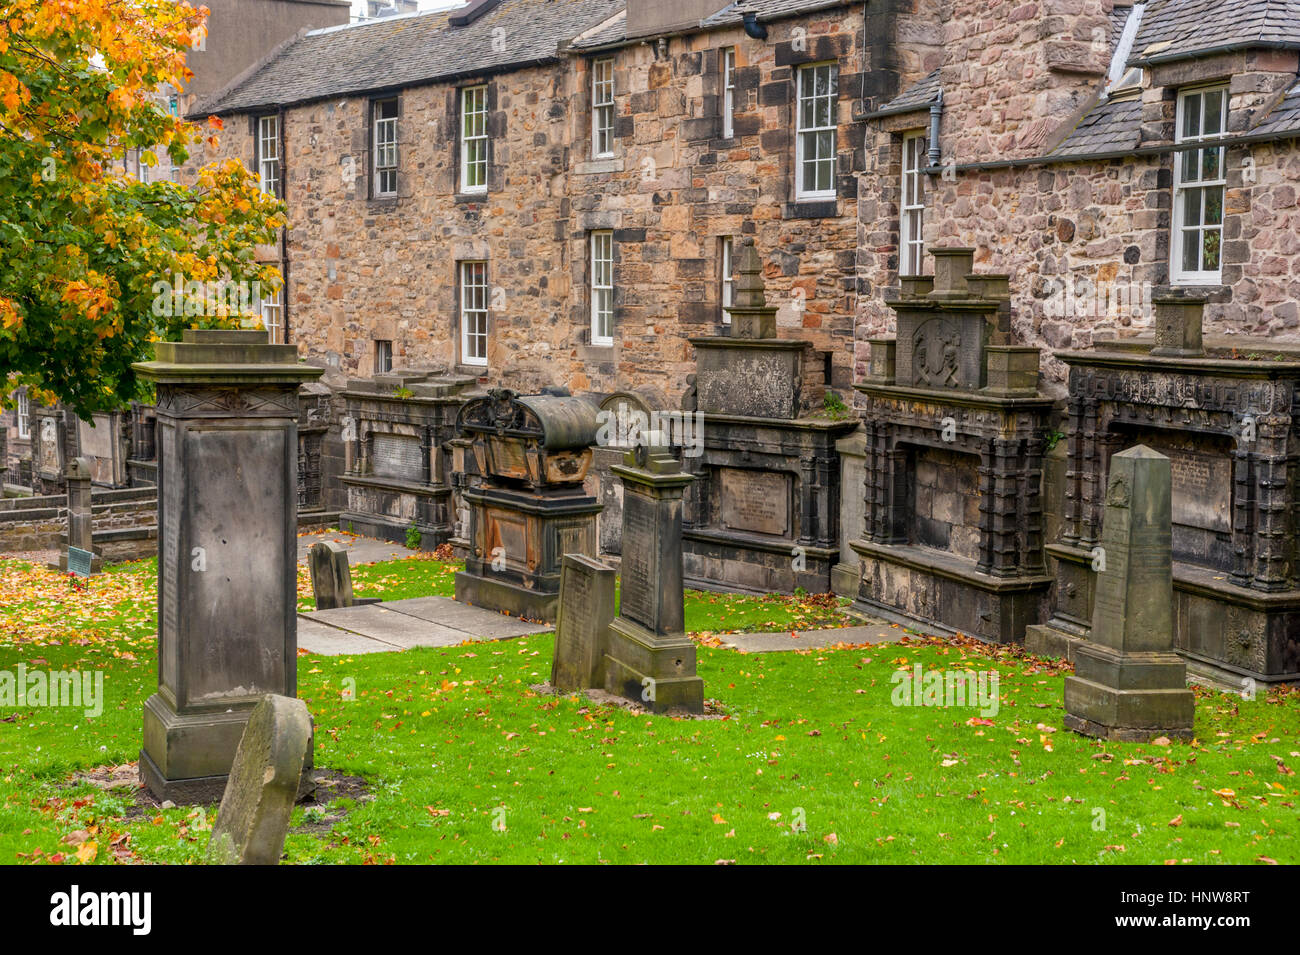 Graves in the Grayfriars church yard ibuild into the sides of buildings on the Grassmarket Edinburgh, scotland. Stock Photo